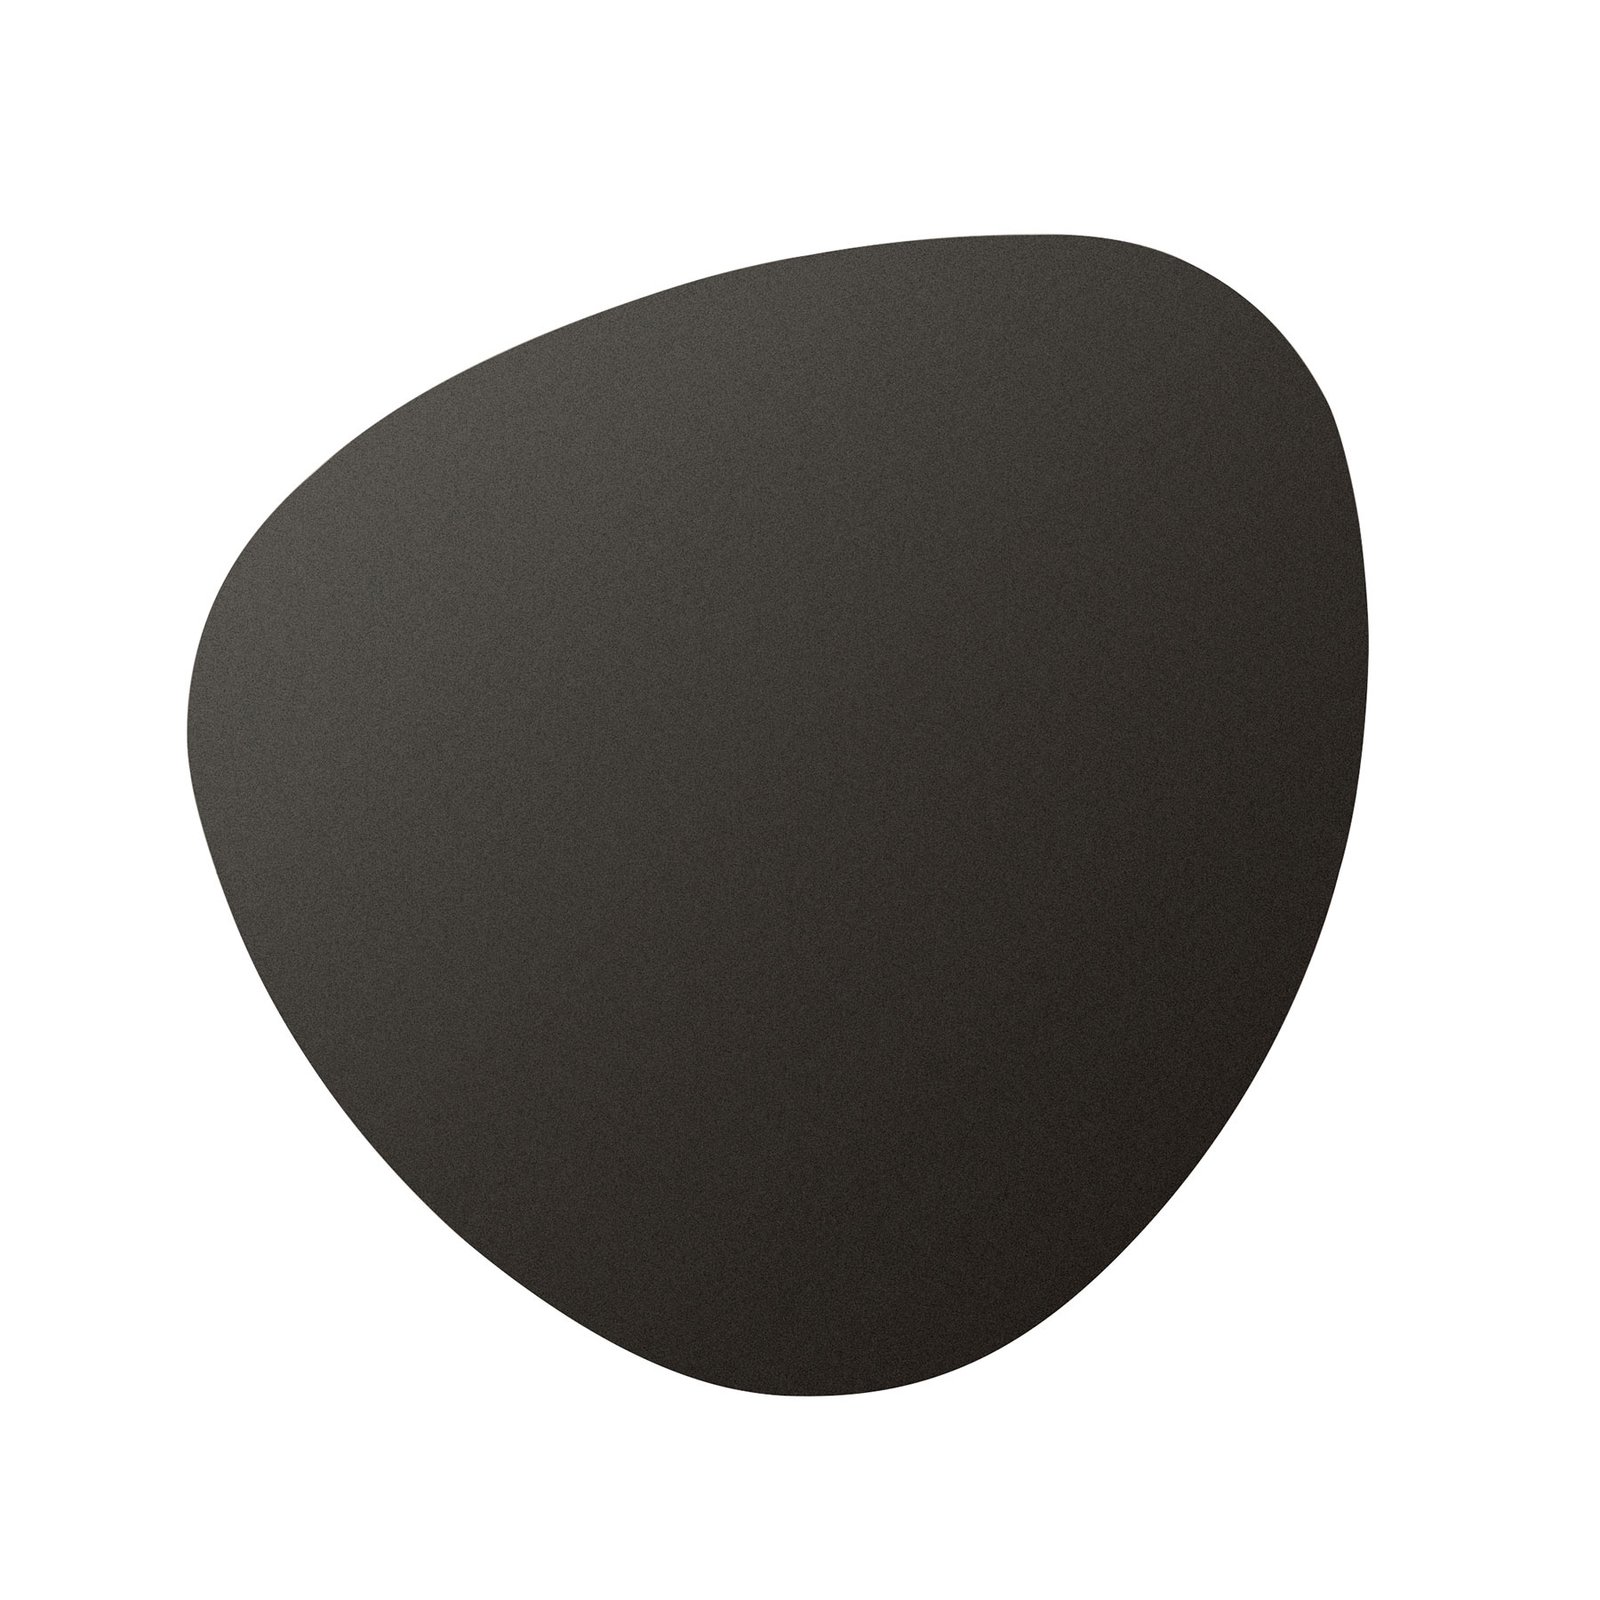 Bover Tria 04 outdoor wall light graphite brown